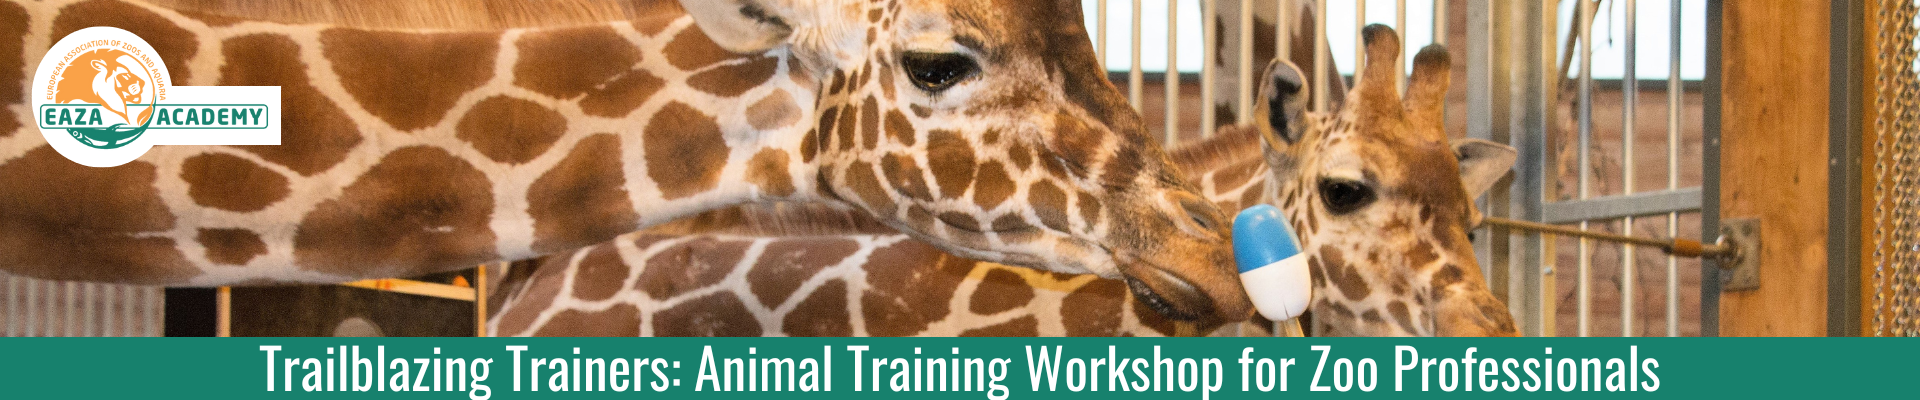 Trailblazing Trainers: Animal Training Workshop for Zoo Professionals